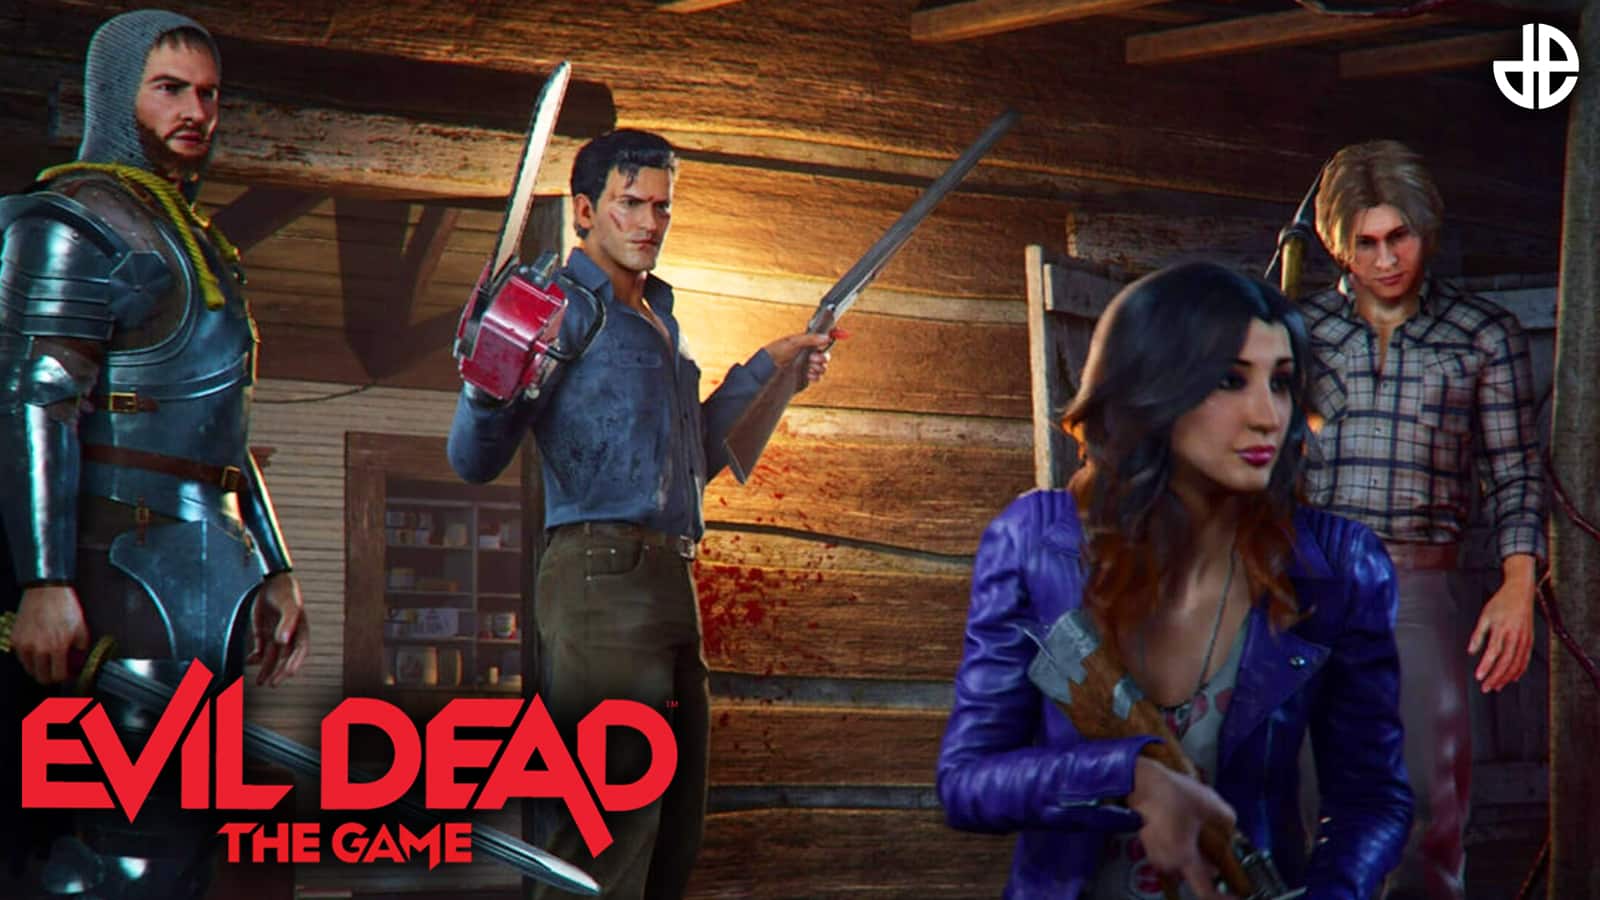 Evil Dead: The Game gameplay premiere shown during Summer Game